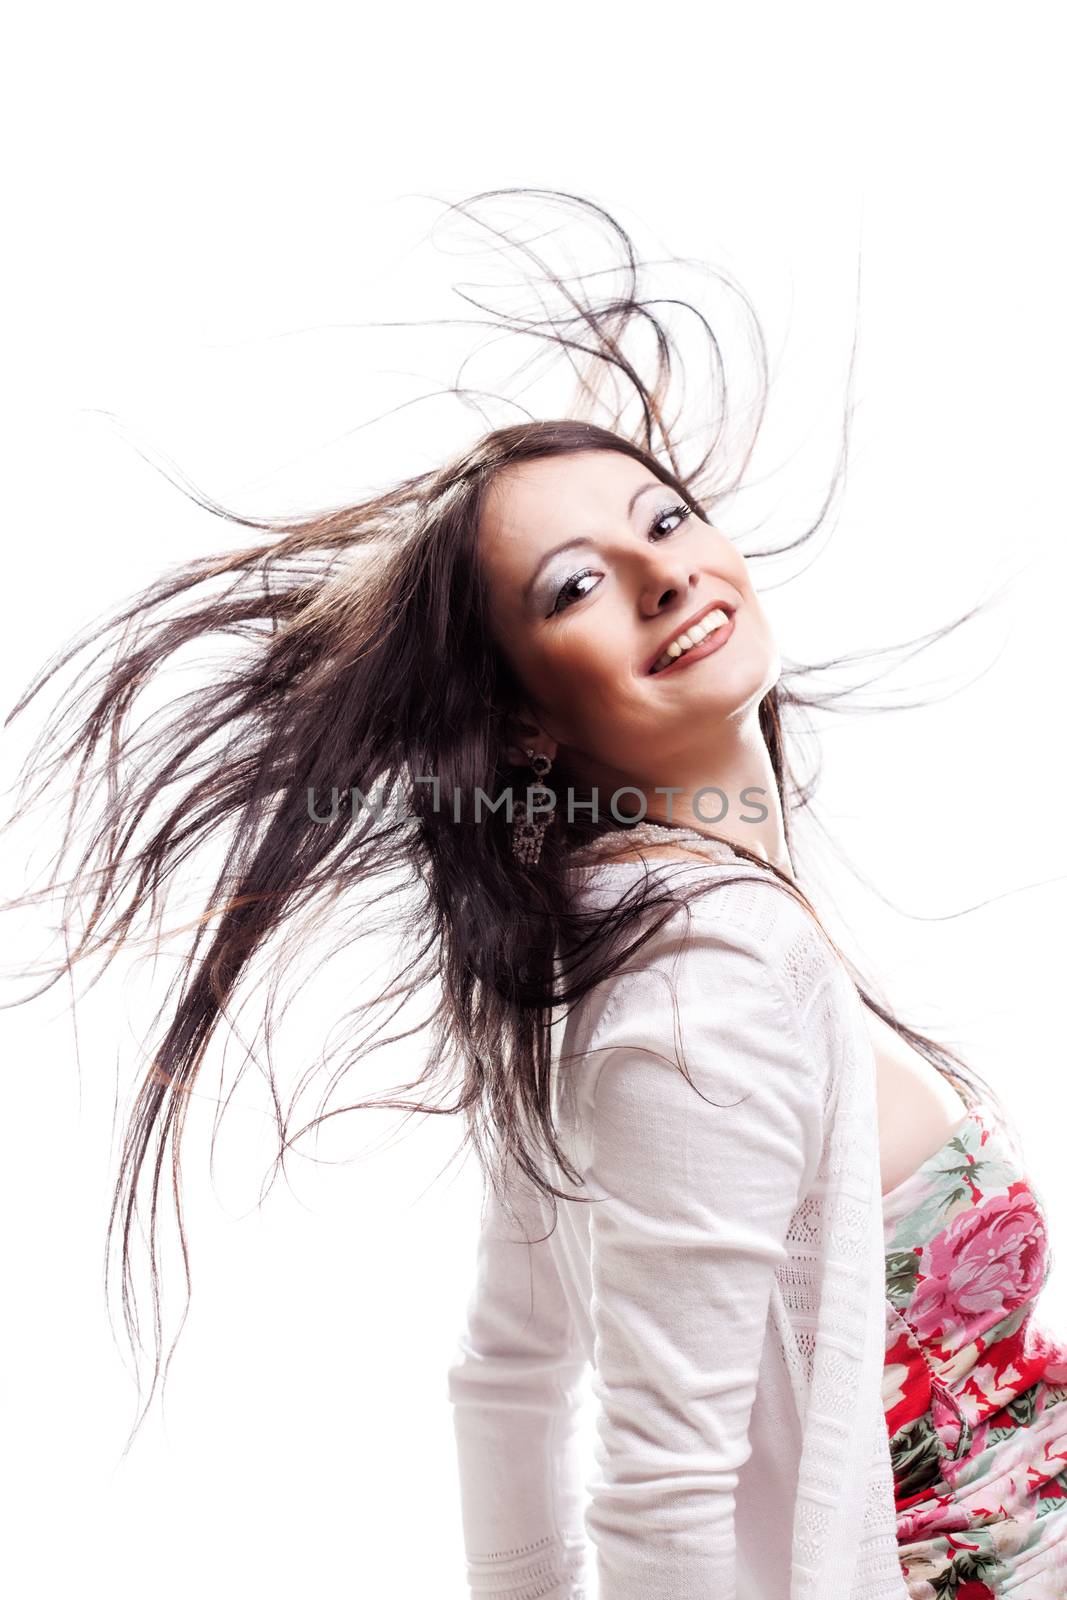 beautiful girl with hair in the air by kokimk